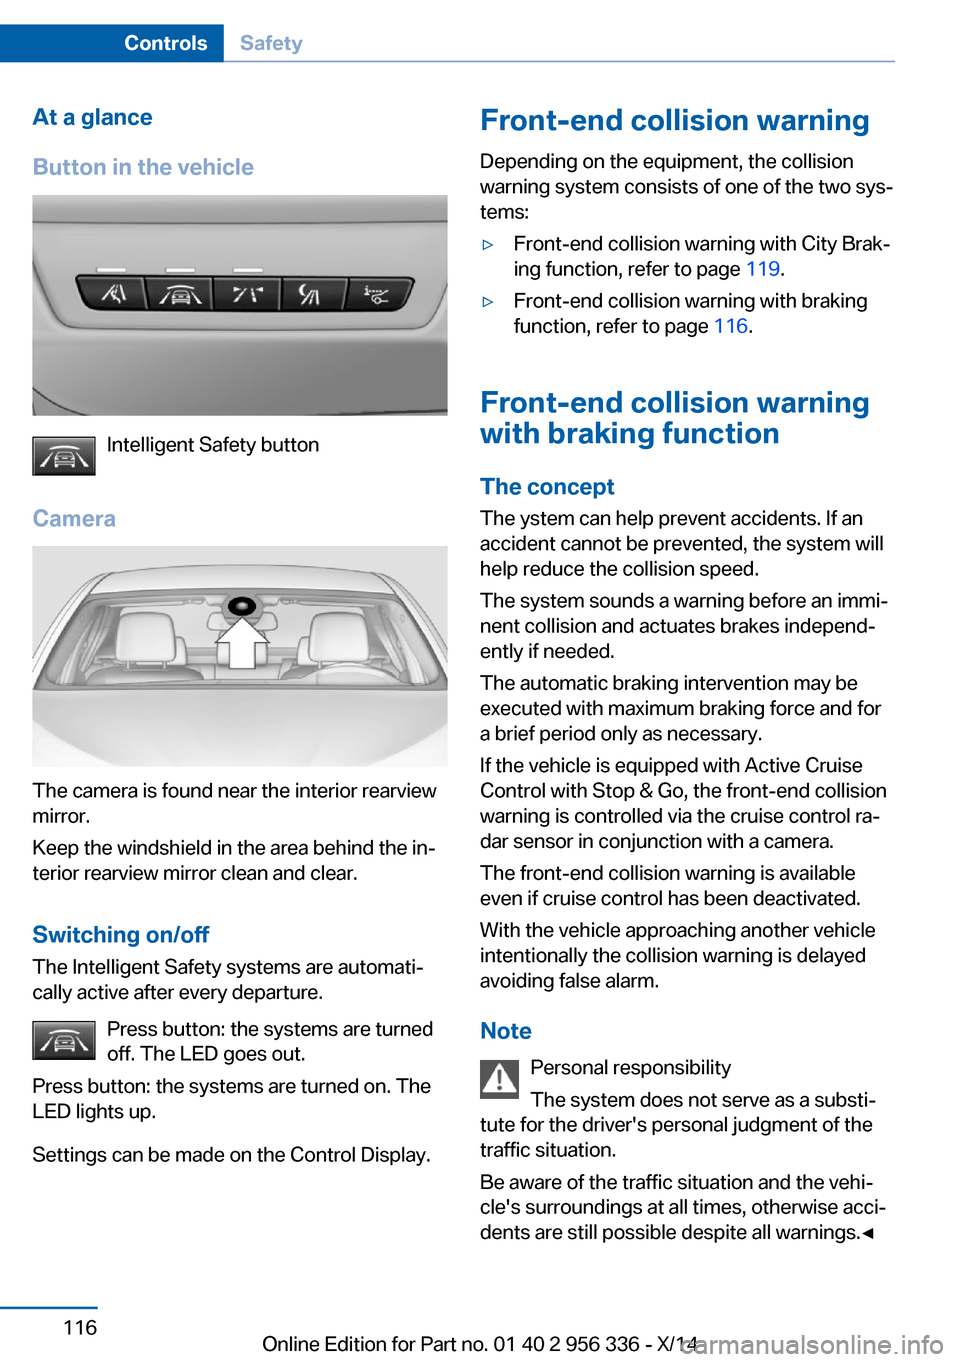 BMW 6 SERIES CONVERTIBLE 2014 F12 Owners Guide At a glance
Button in the vehicle
Intelligent Safety button
Camera
The camera is found near the interior rearview
mirror.
Keep the windshield in the area behind the in‐
terior rearview mirror clean 